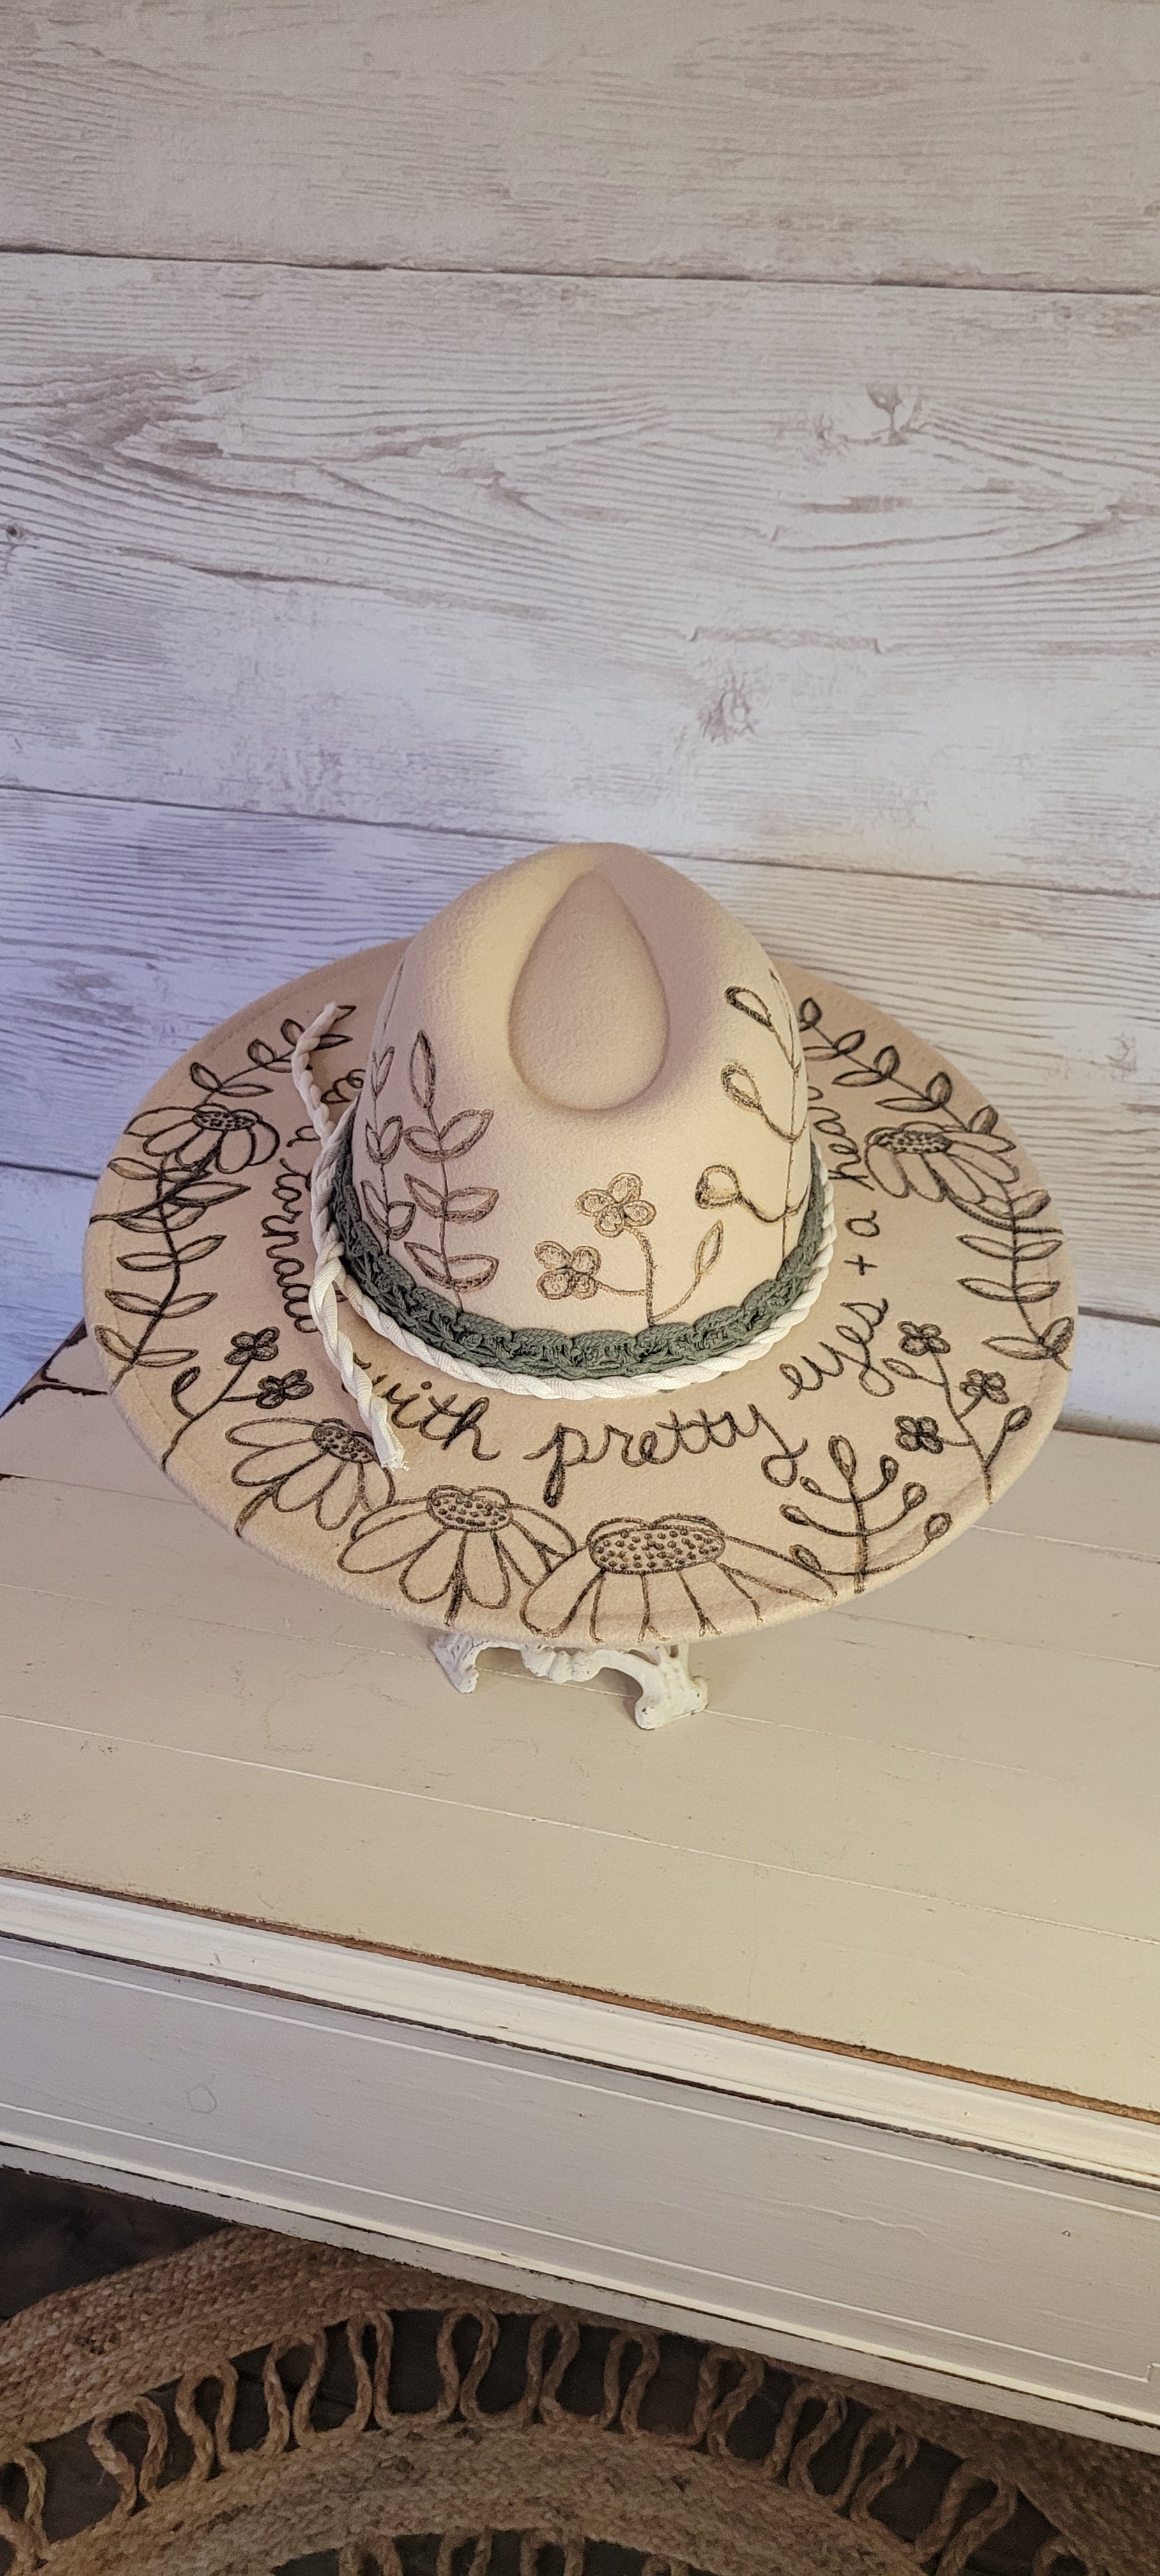 Features engraved whimsical flowers & plants Felt hat Flat brim 65% polyester and 35% cotton Ribbon drawstring for hat size adjustment Head Circumference: 25" H:5.25" L:16" W:14.5" Head Circumference: 24" Crown Height: 5" Brim Length: 15.75" Brim Width: 14.5" Branded & numbered inside crown Custom engraved by Kayla